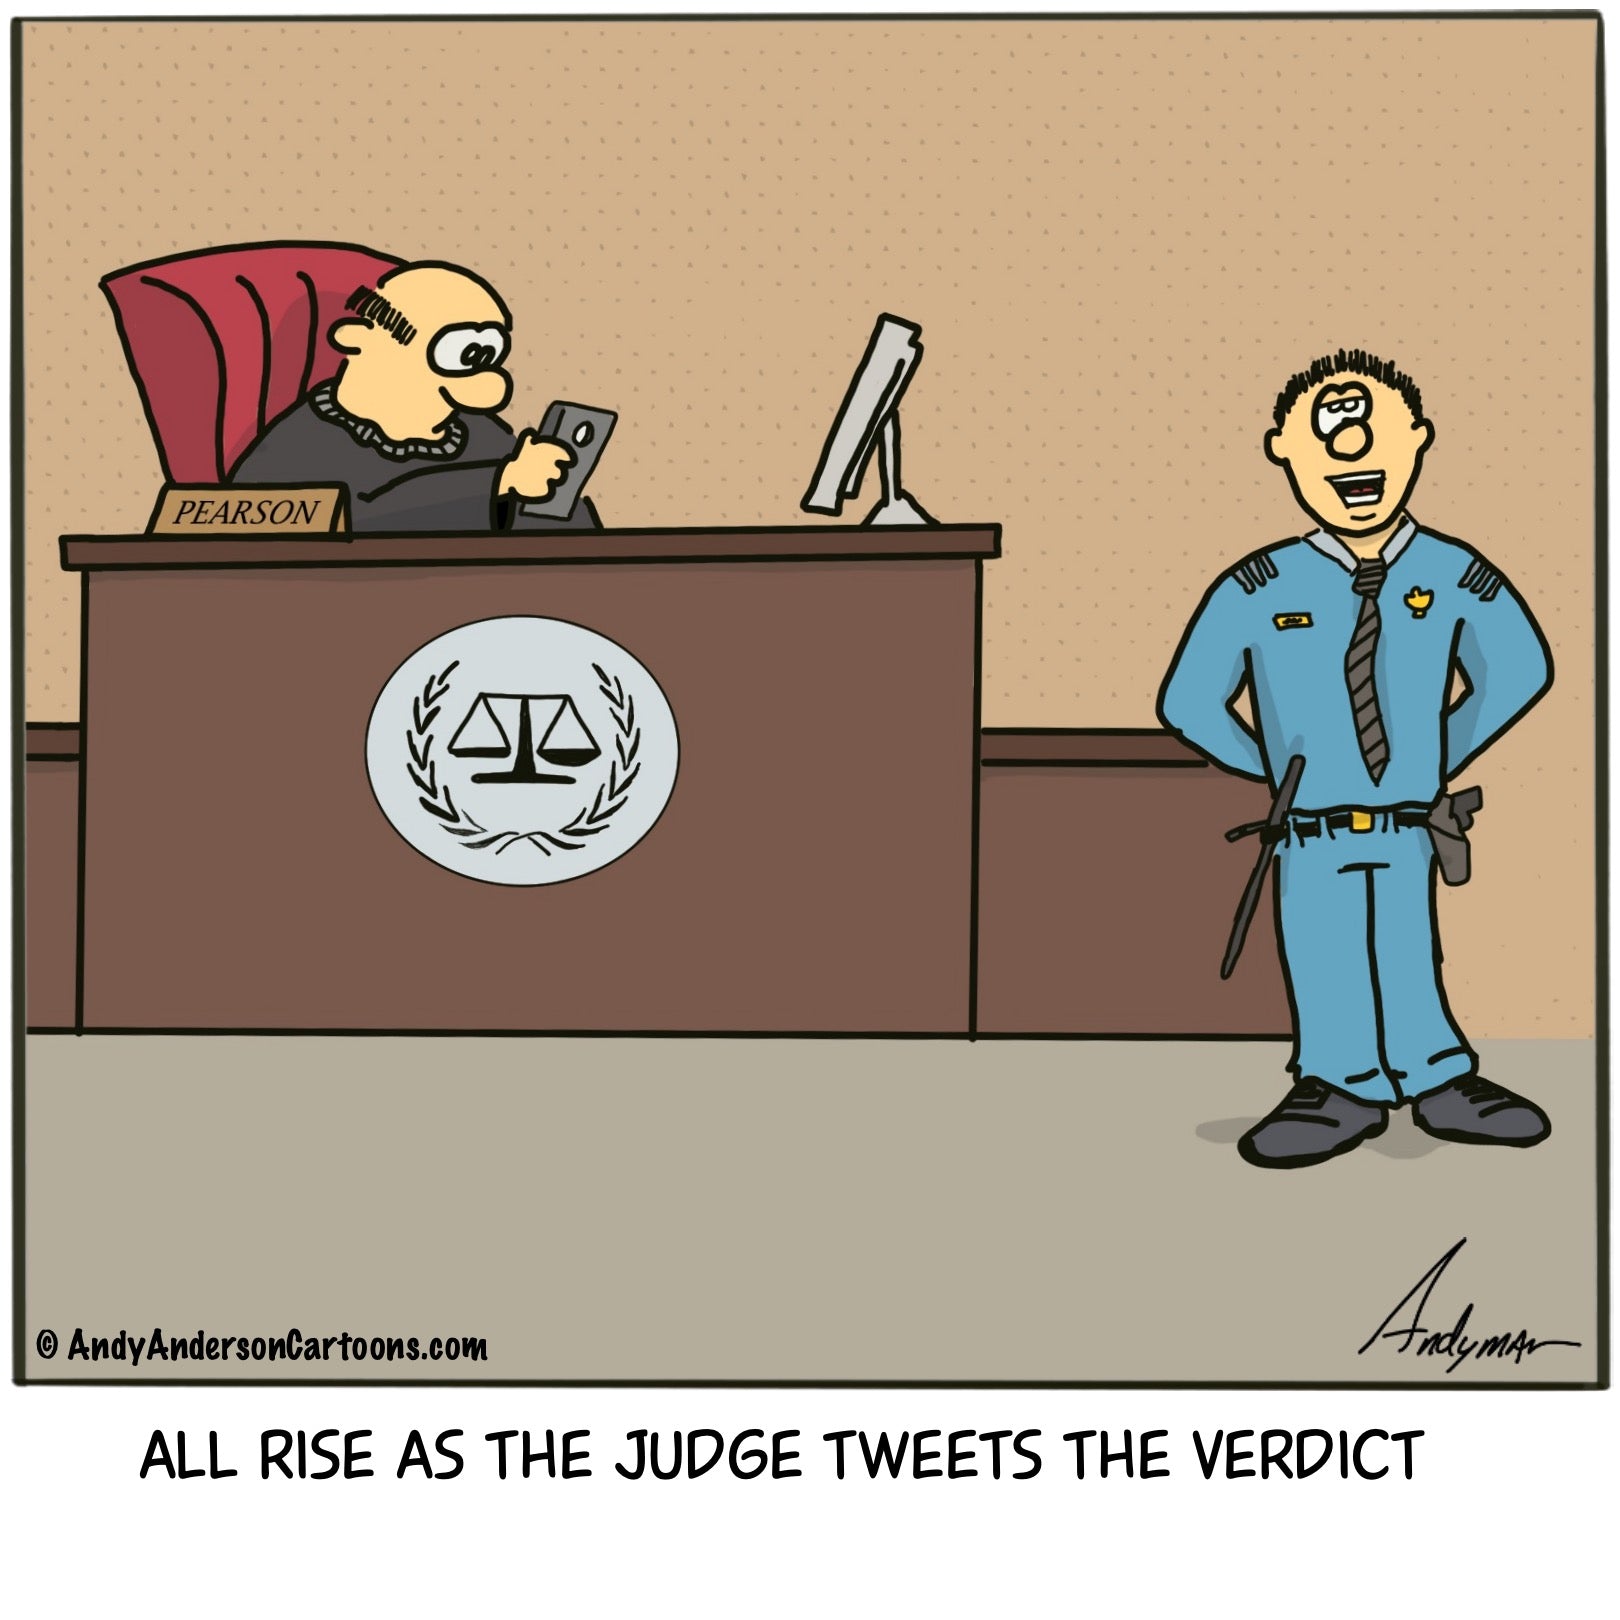 Cartoon about a judge tweeting a verdict by Andy Anderson